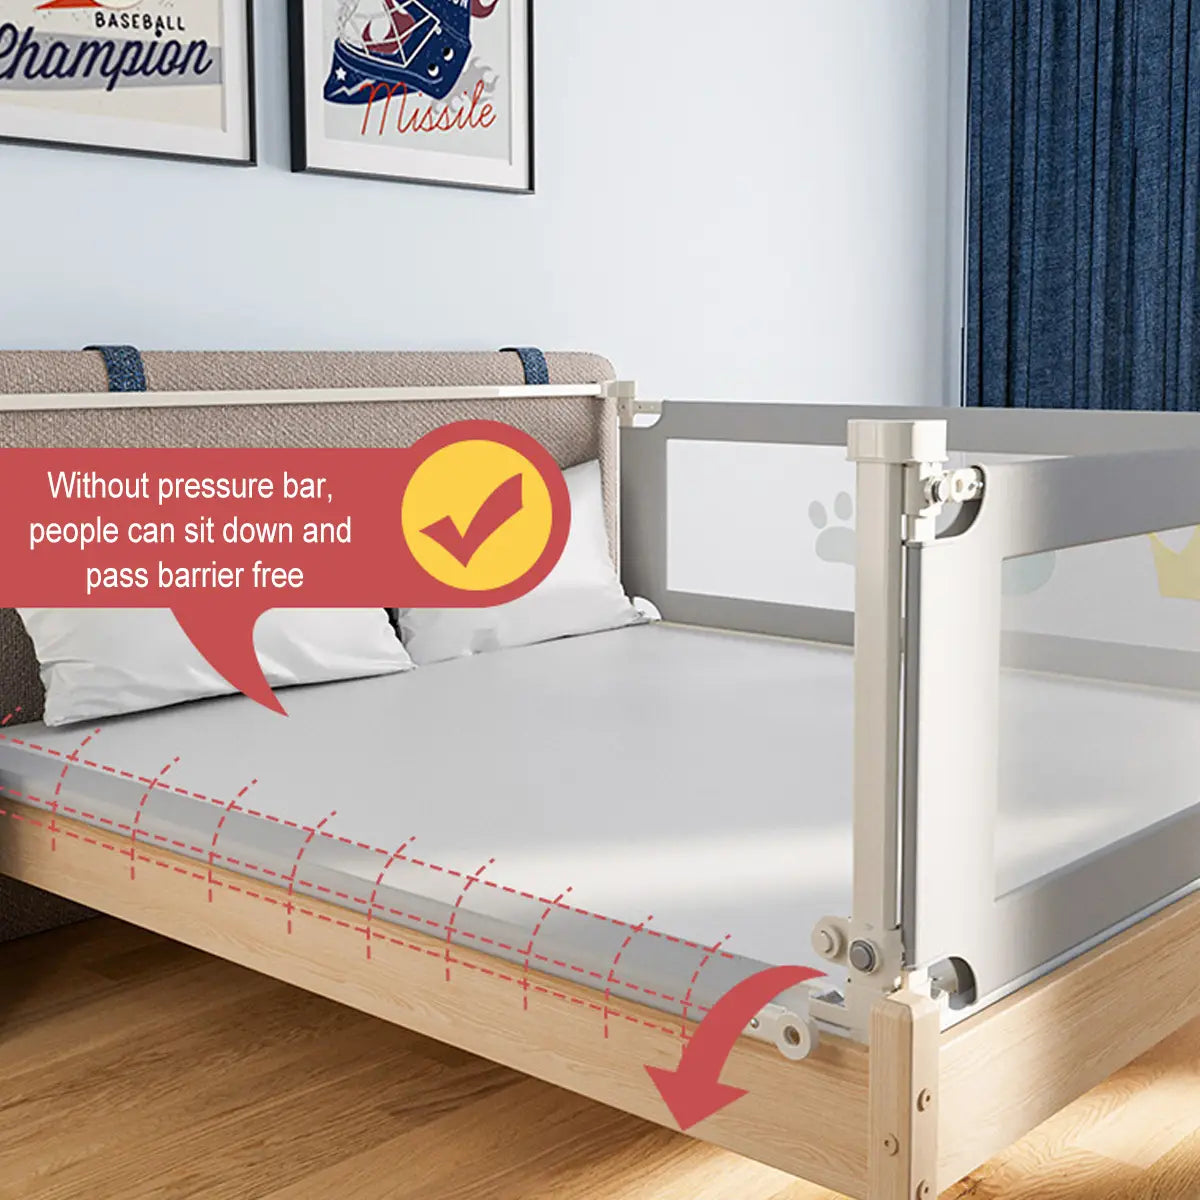 100cm Height Bed Rail/bedrail Kids Safety Cot Guard Protecte